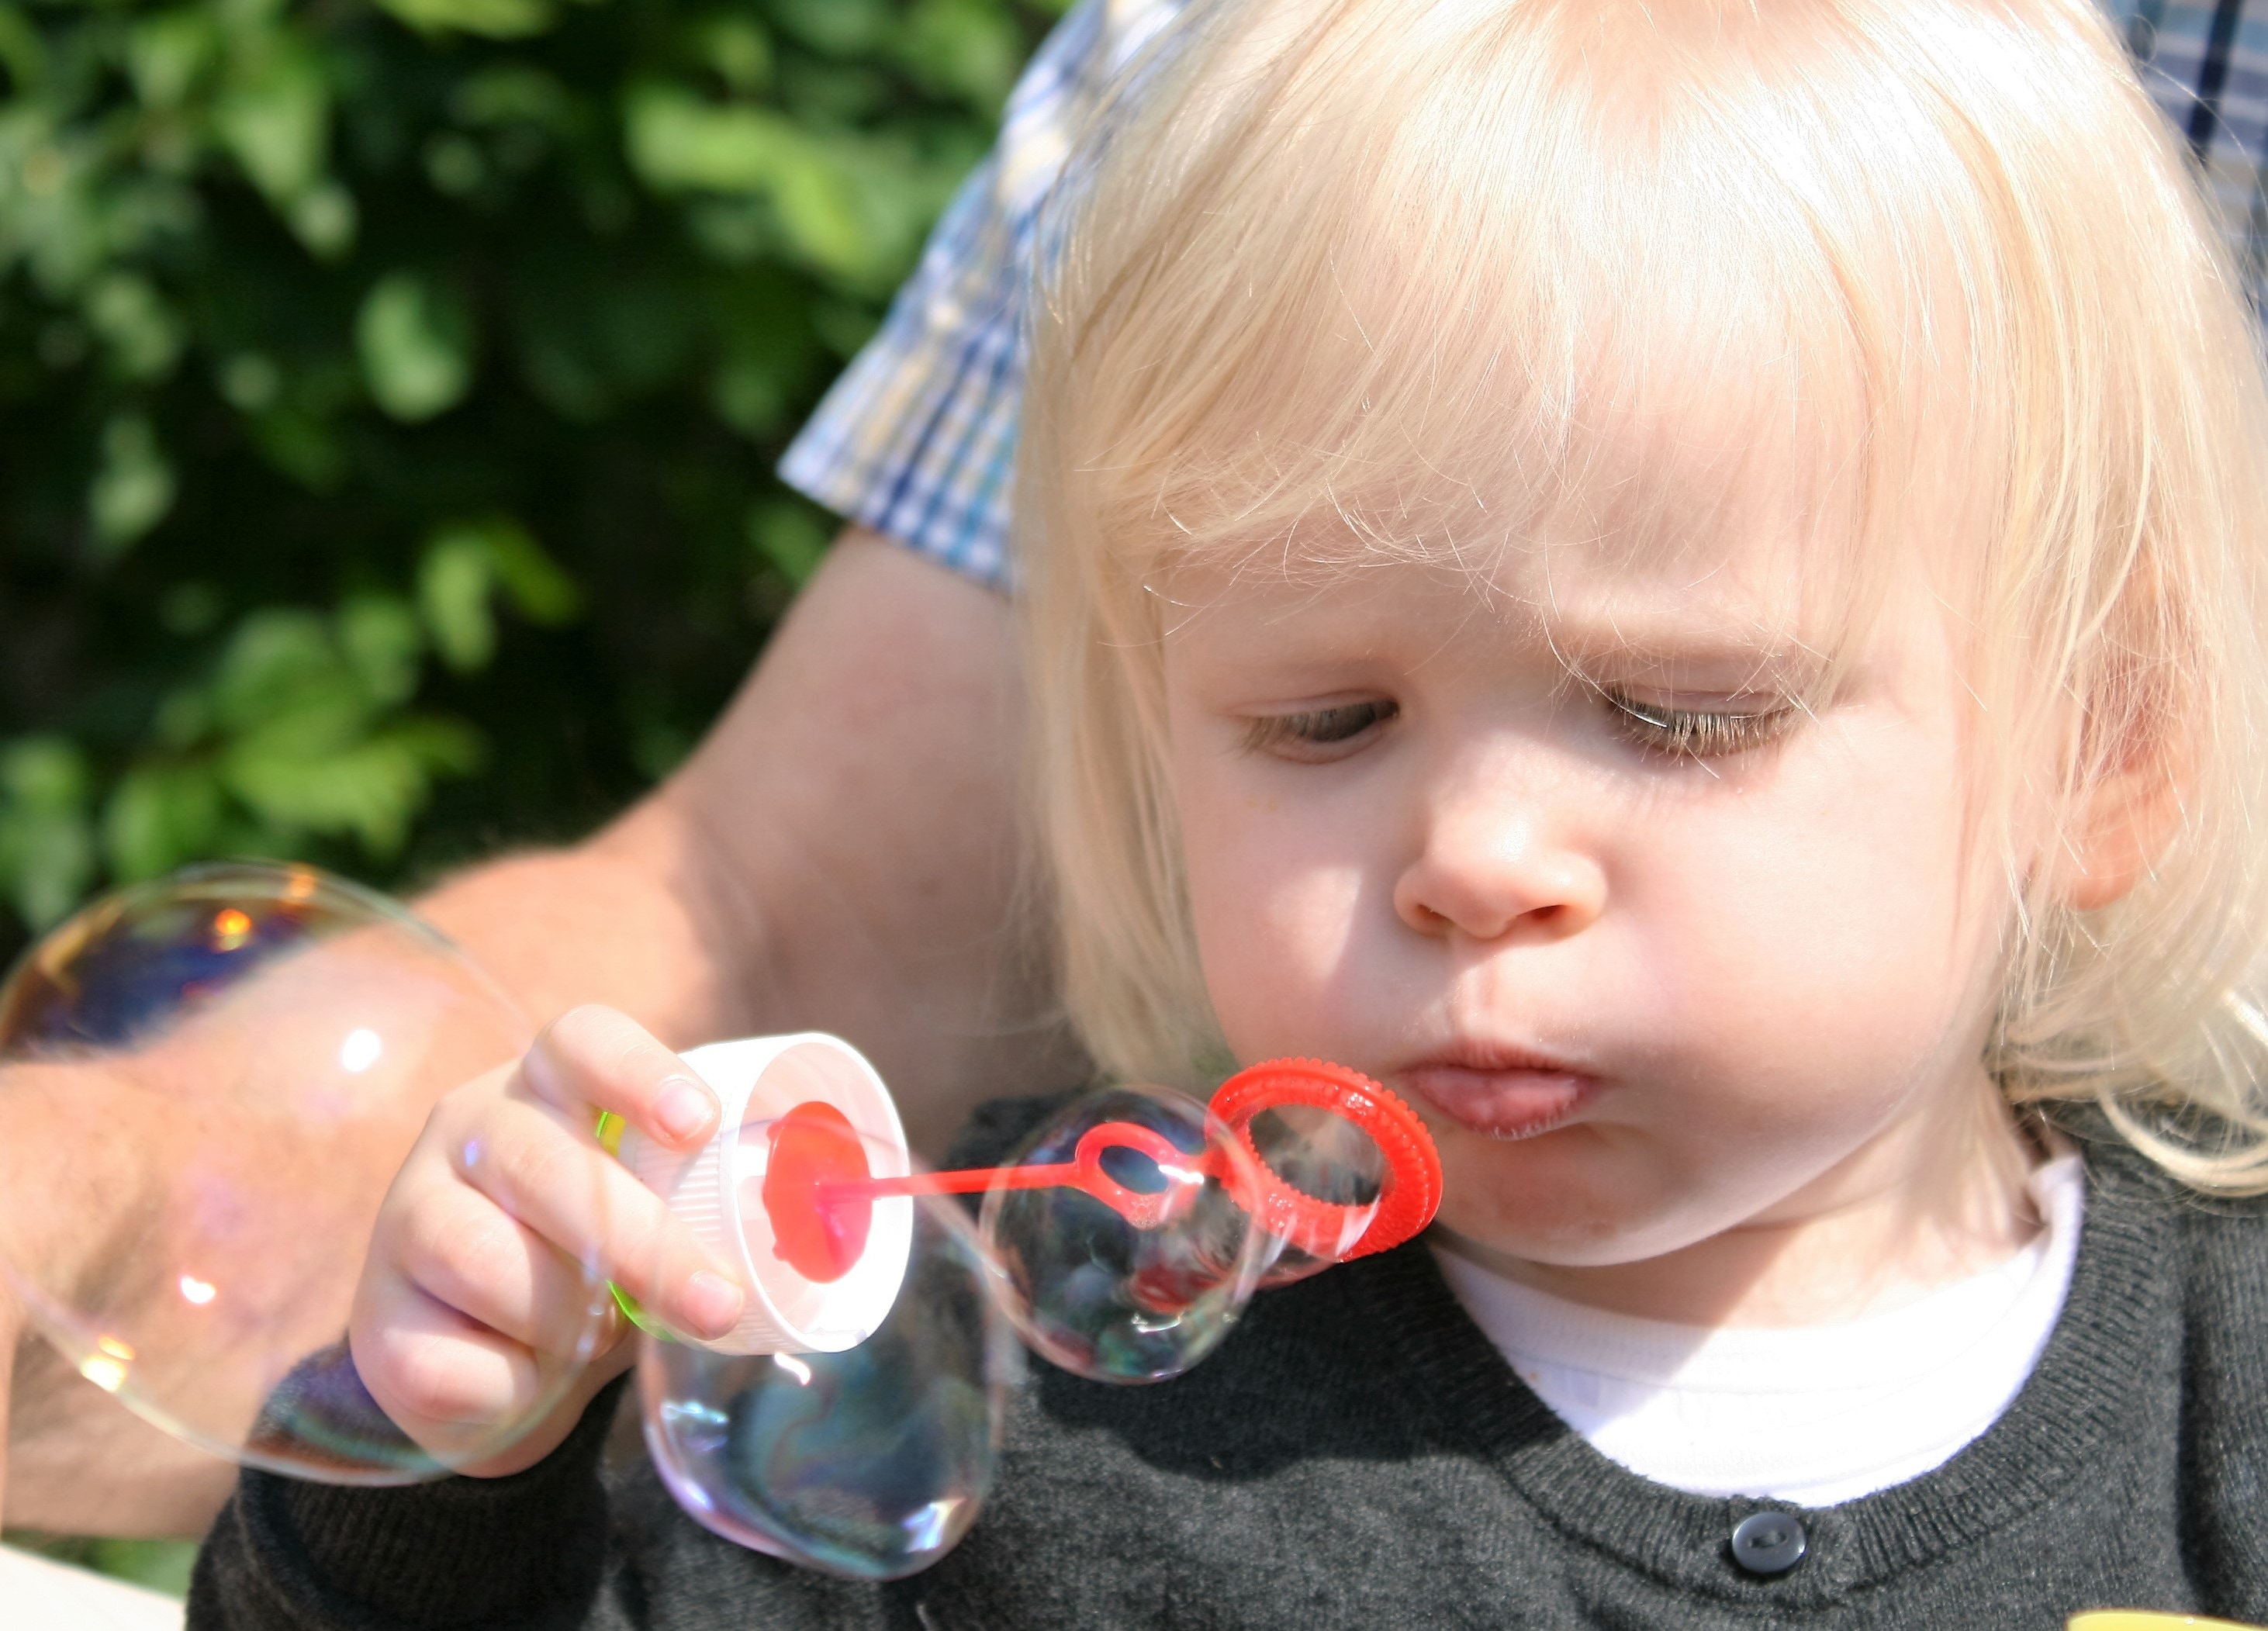 photo of girl holding red blow bubble toy